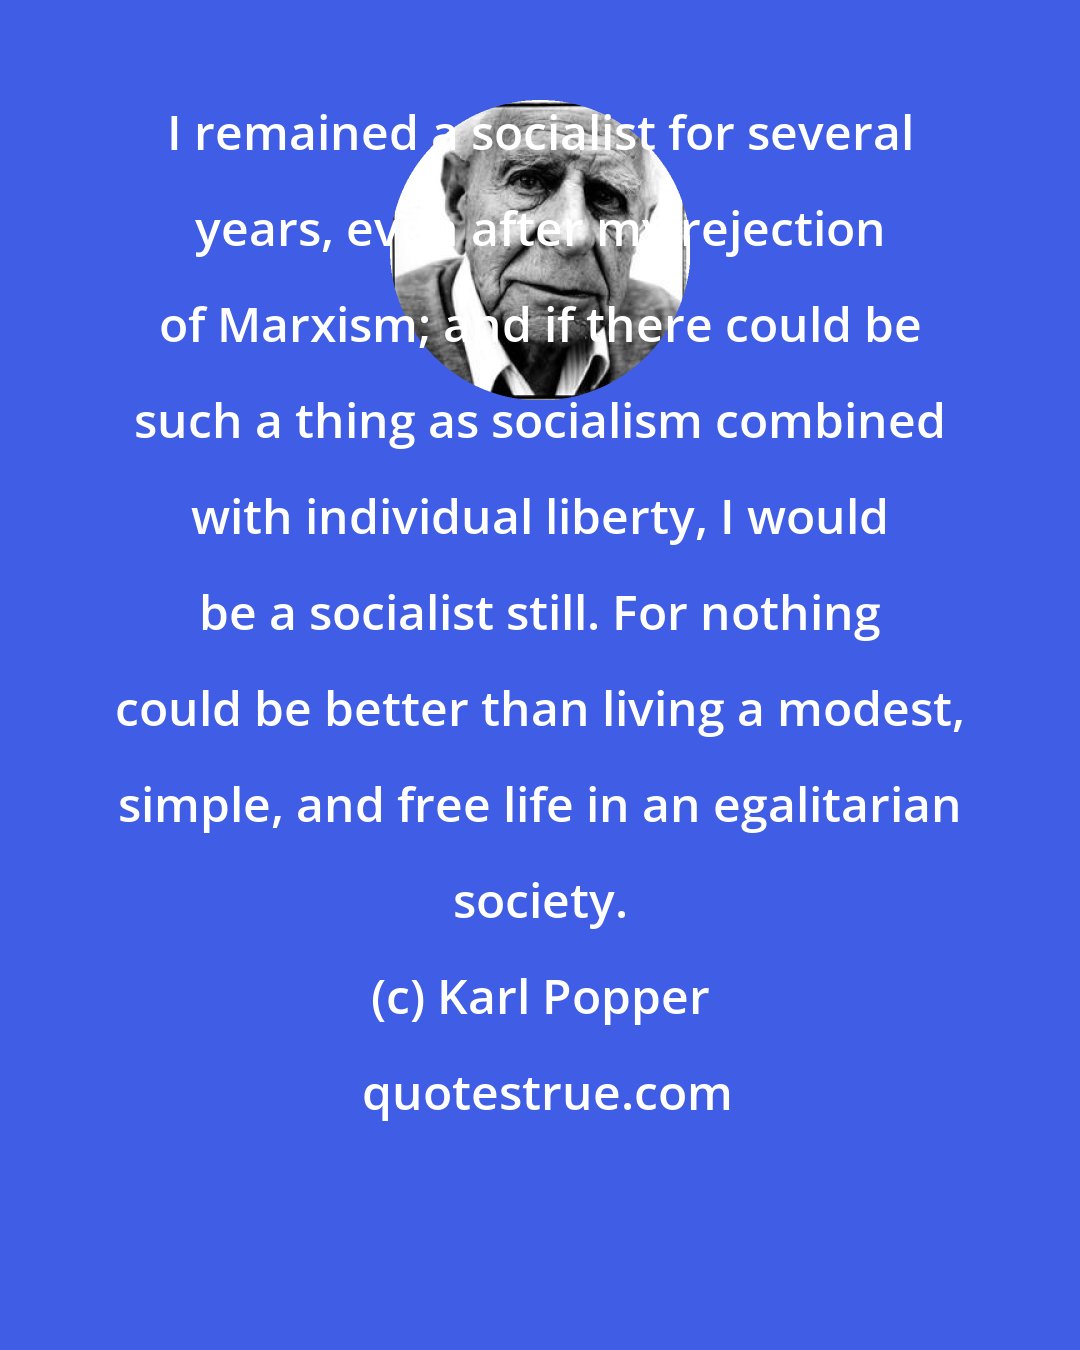 Karl Popper: I remained a socialist for several years, even after my rejection of Marxism; and if there could be such a thing as socialism combined with individual liberty, I would be a socialist still. For nothing could be better than living a modest, simple, and free life in an egalitarian society.